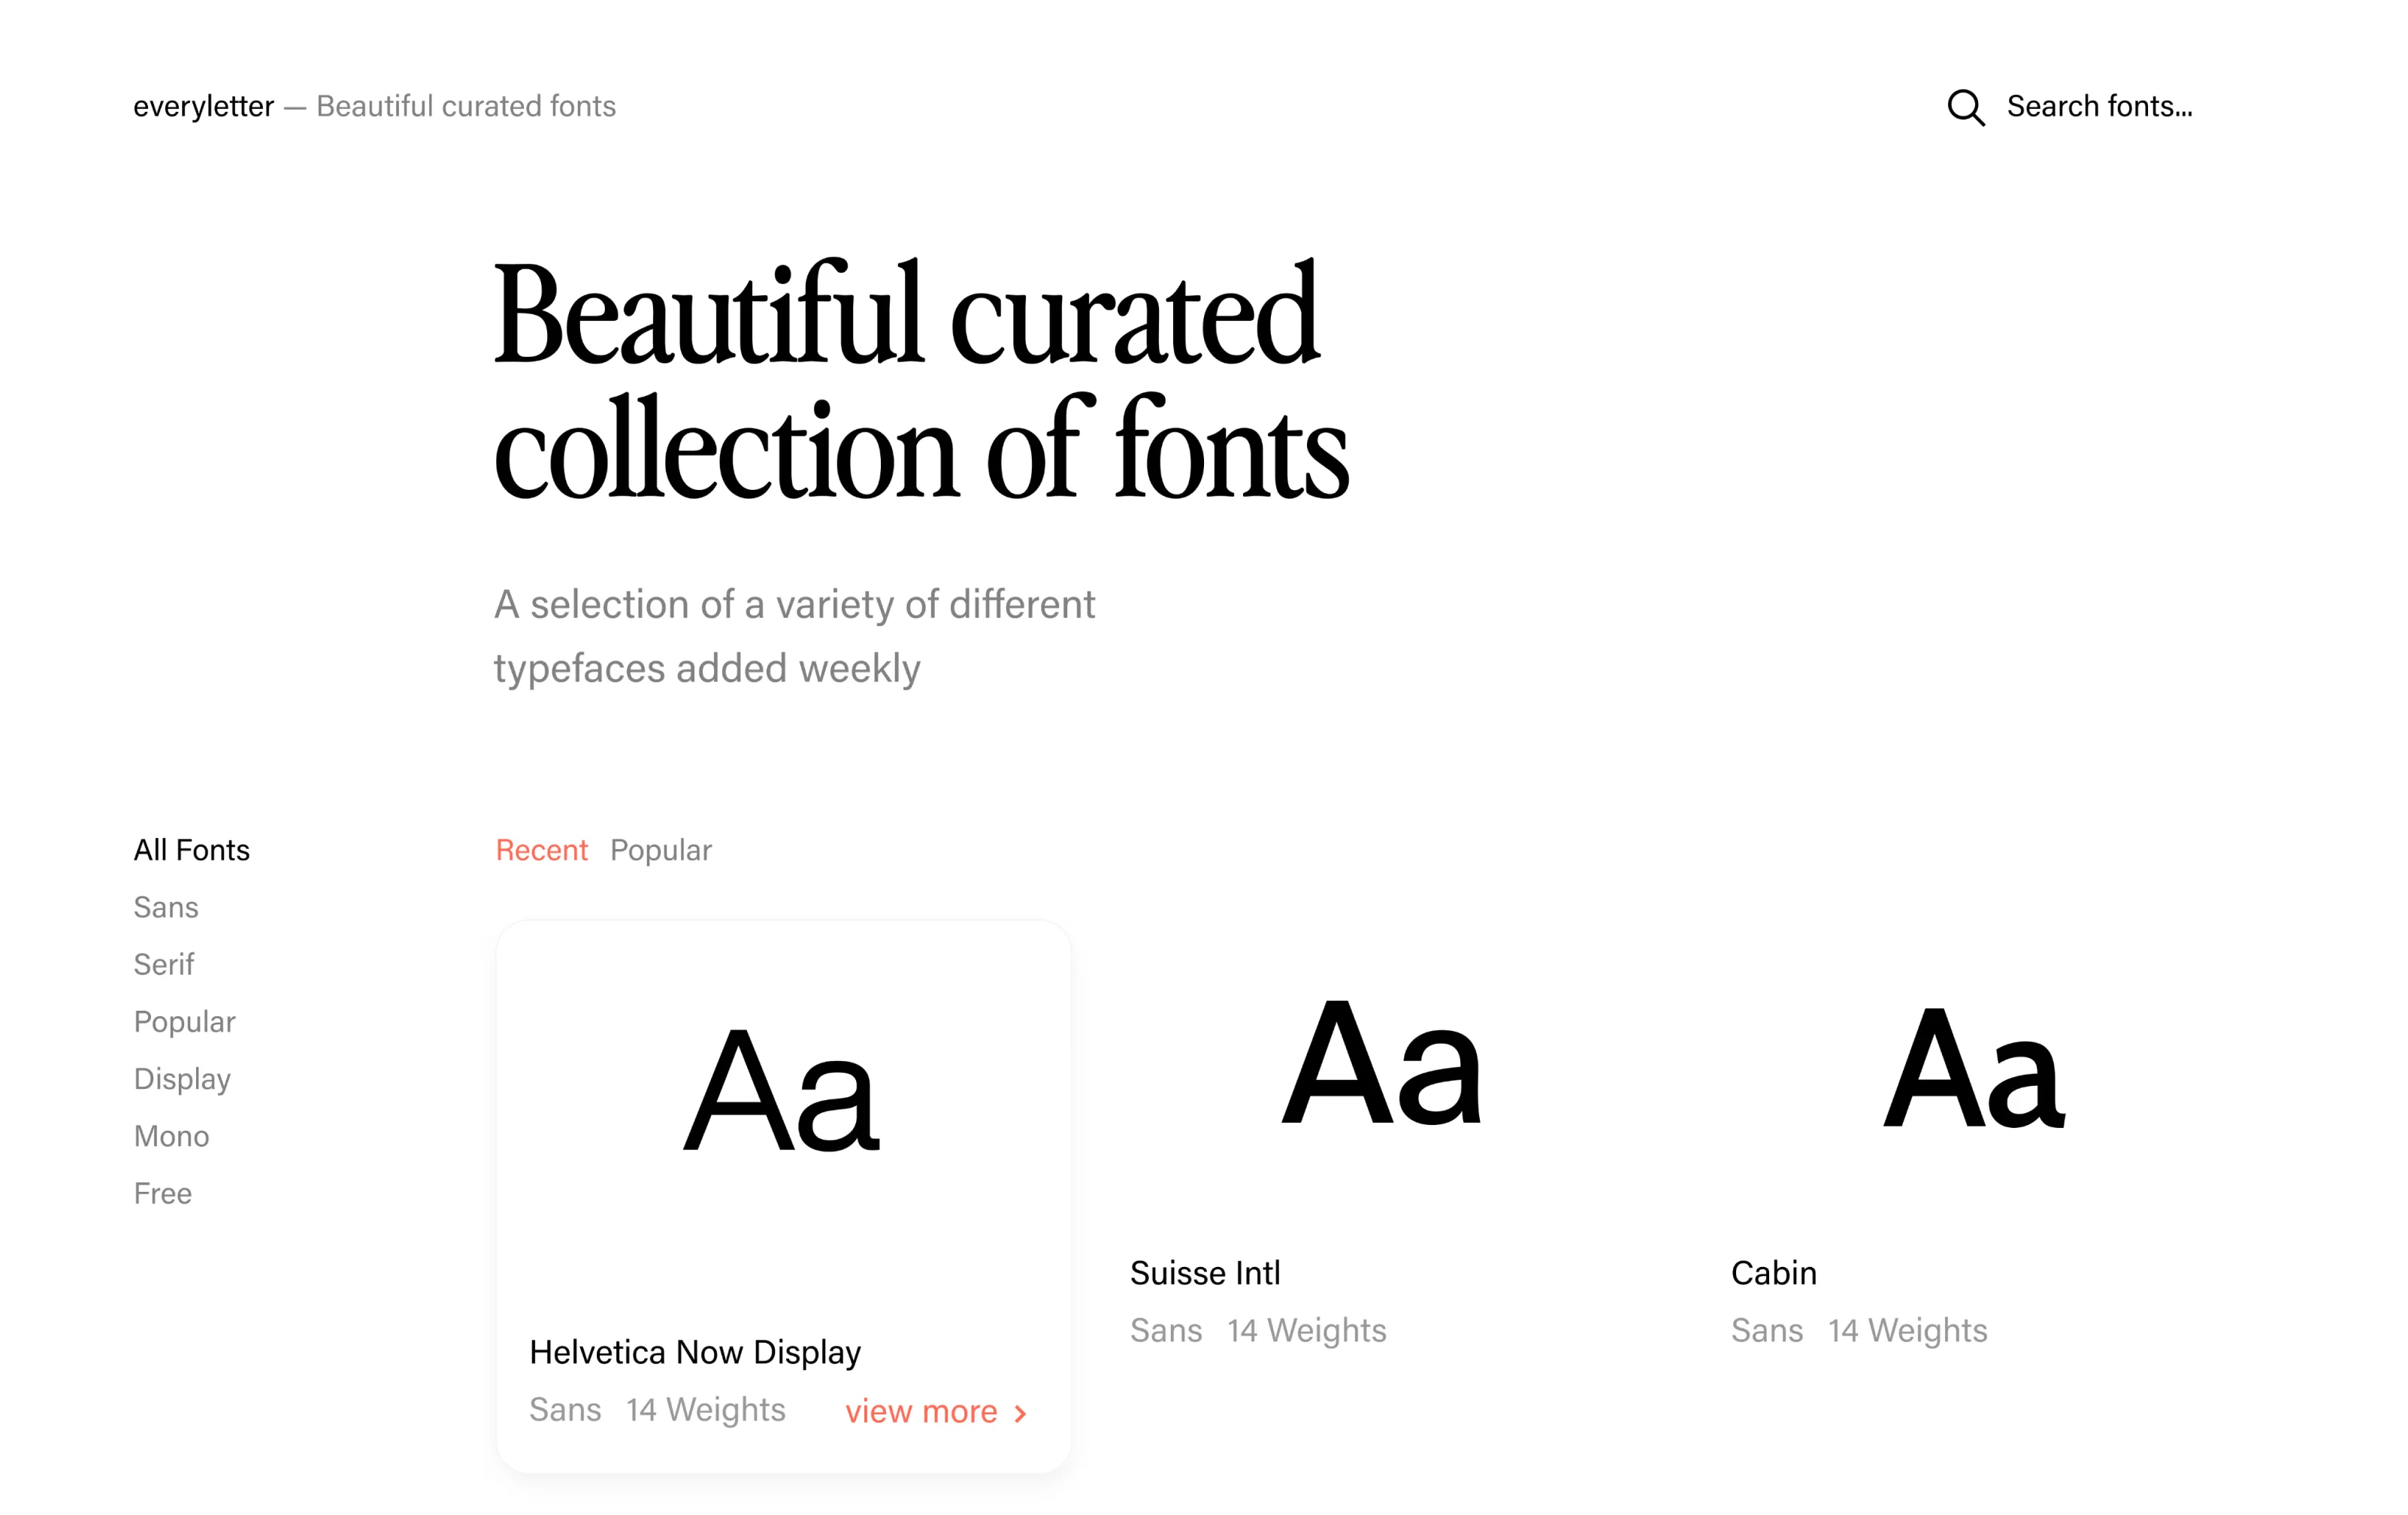 Web design of displaying various fonts in a grid collection